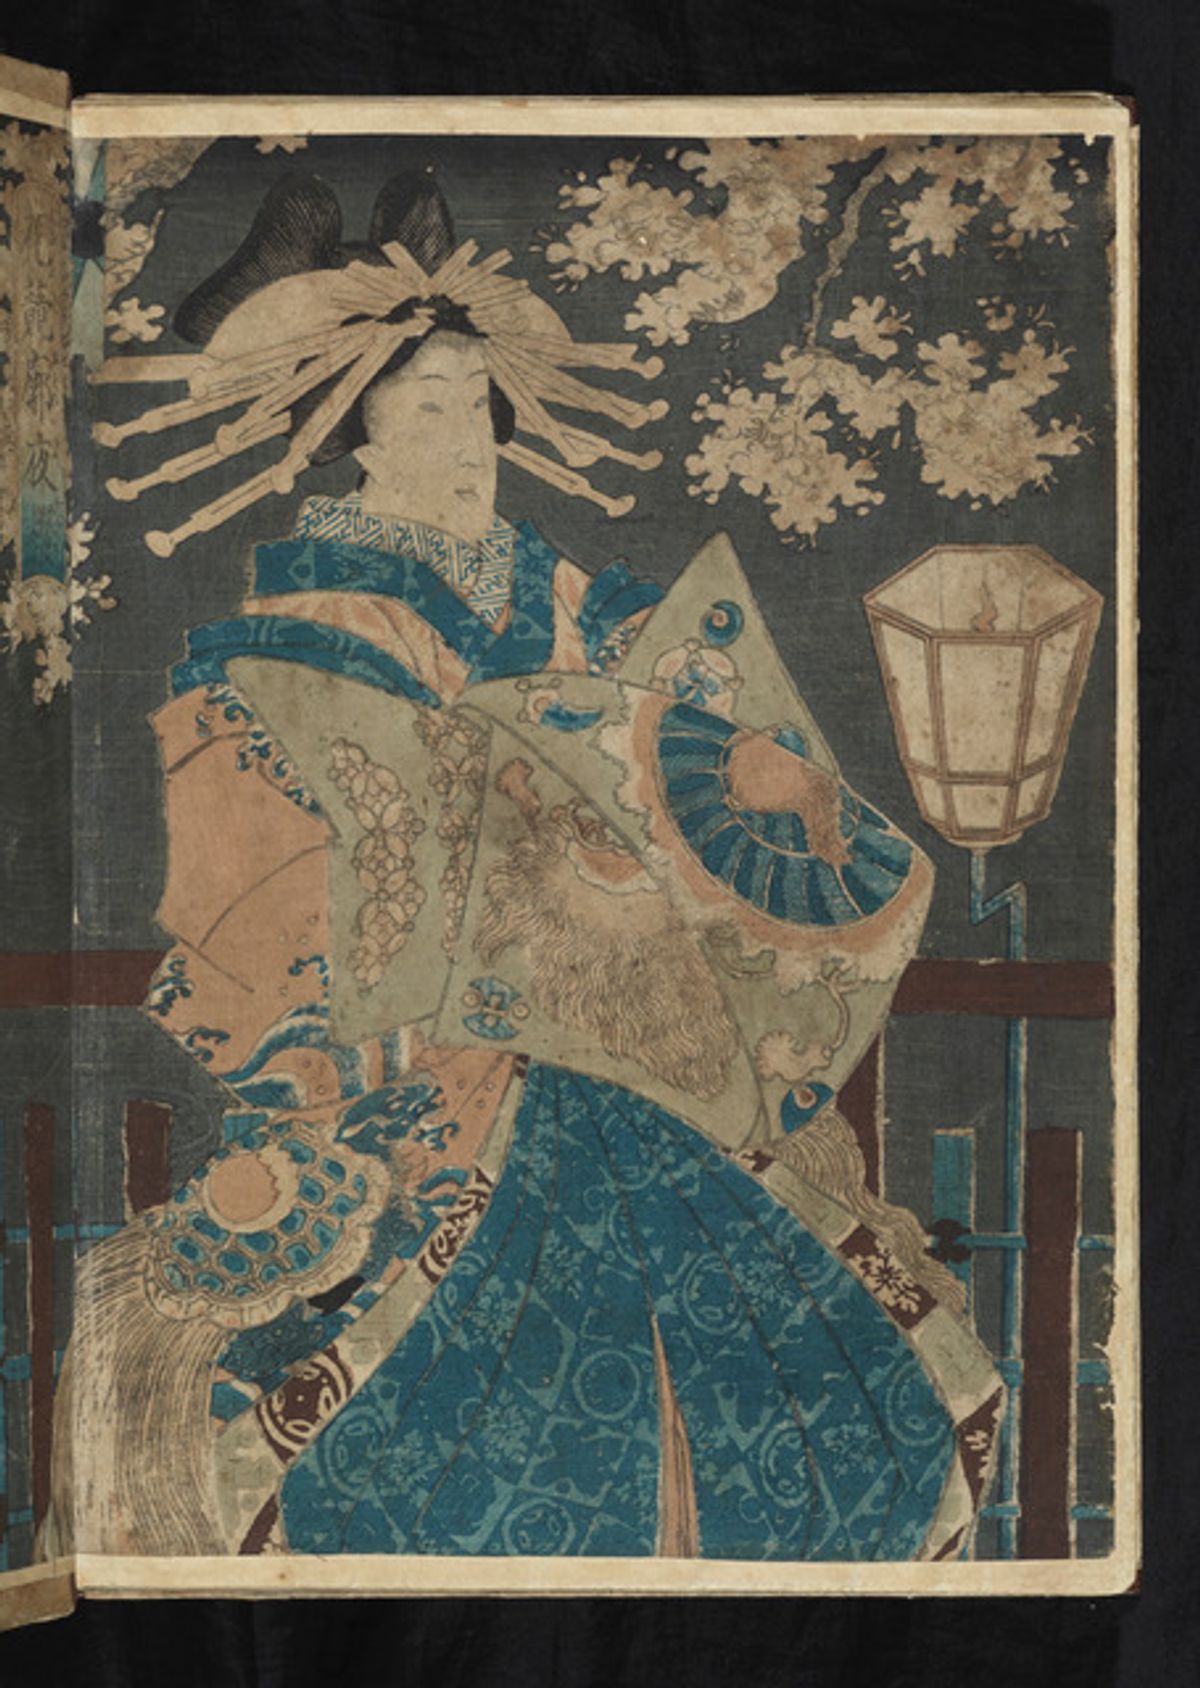 Report on our new book, The Kimono in Print - Sainsbury Institute for the  Study of Japanese Arts and Cultures